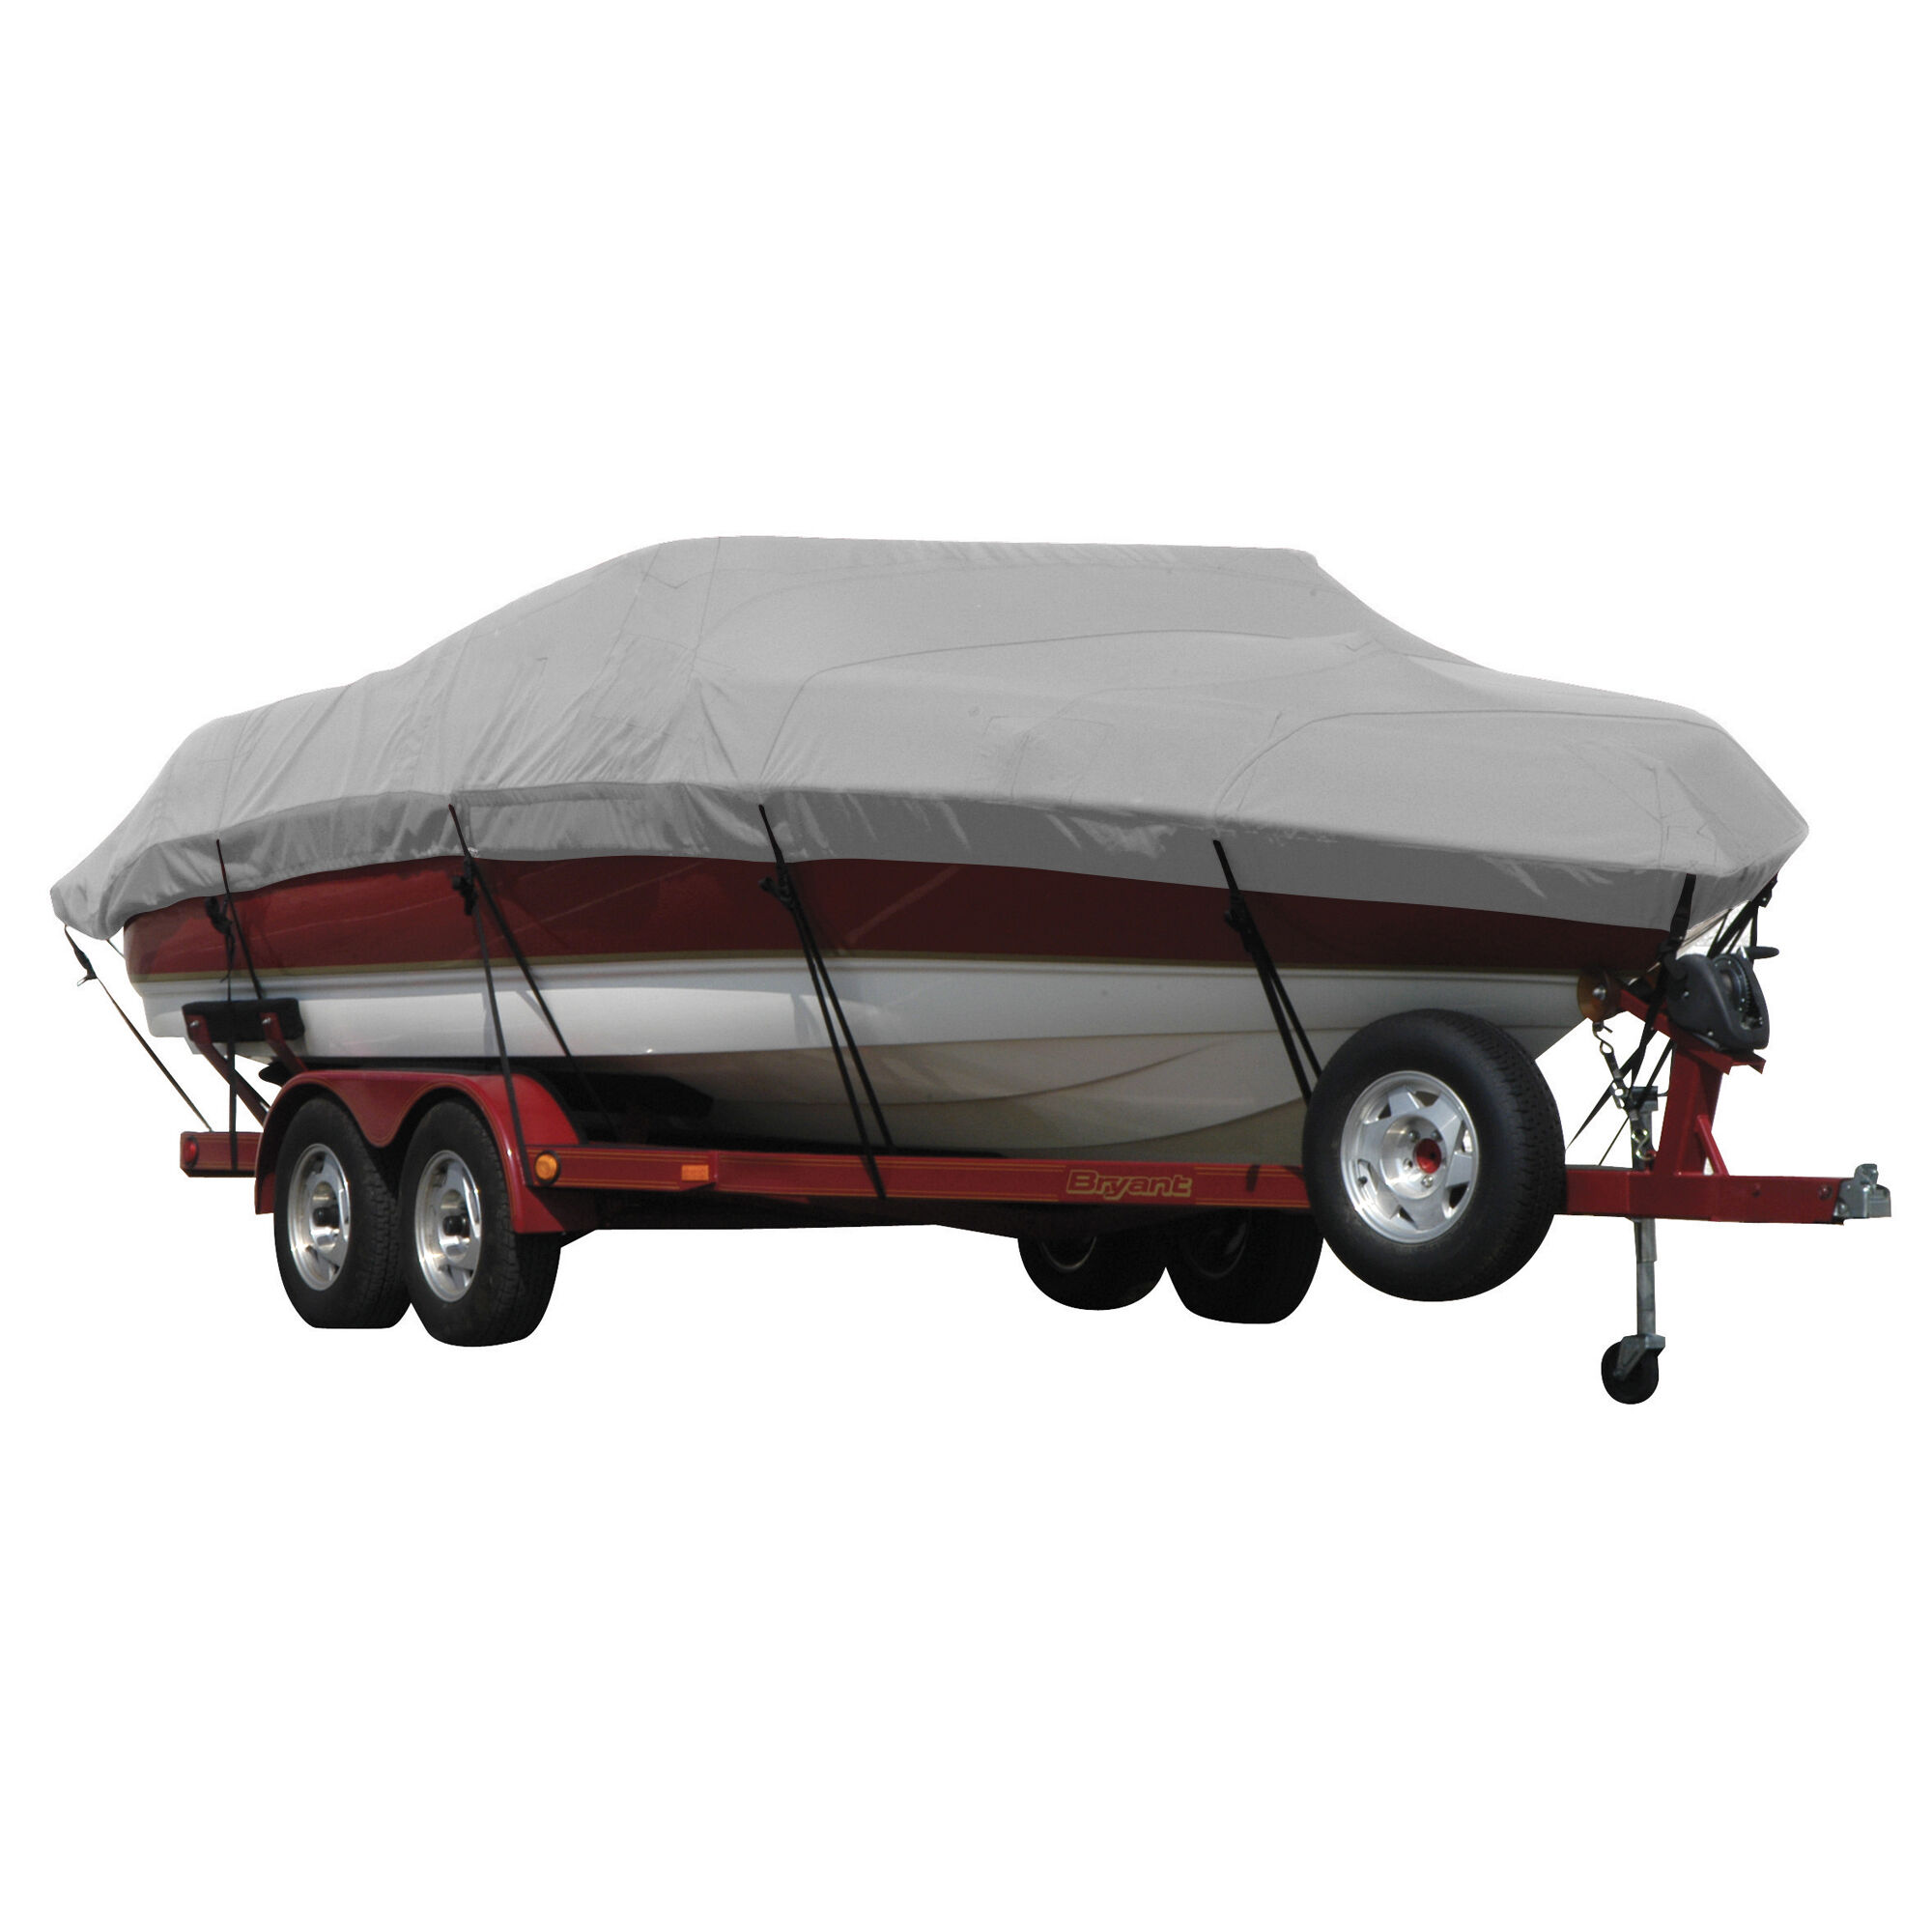 Covermate Exact Fit Sunbrella Boat Cover for Tige 2100 2100 Br Does Not Cover Swim PLATFORMm. Grey